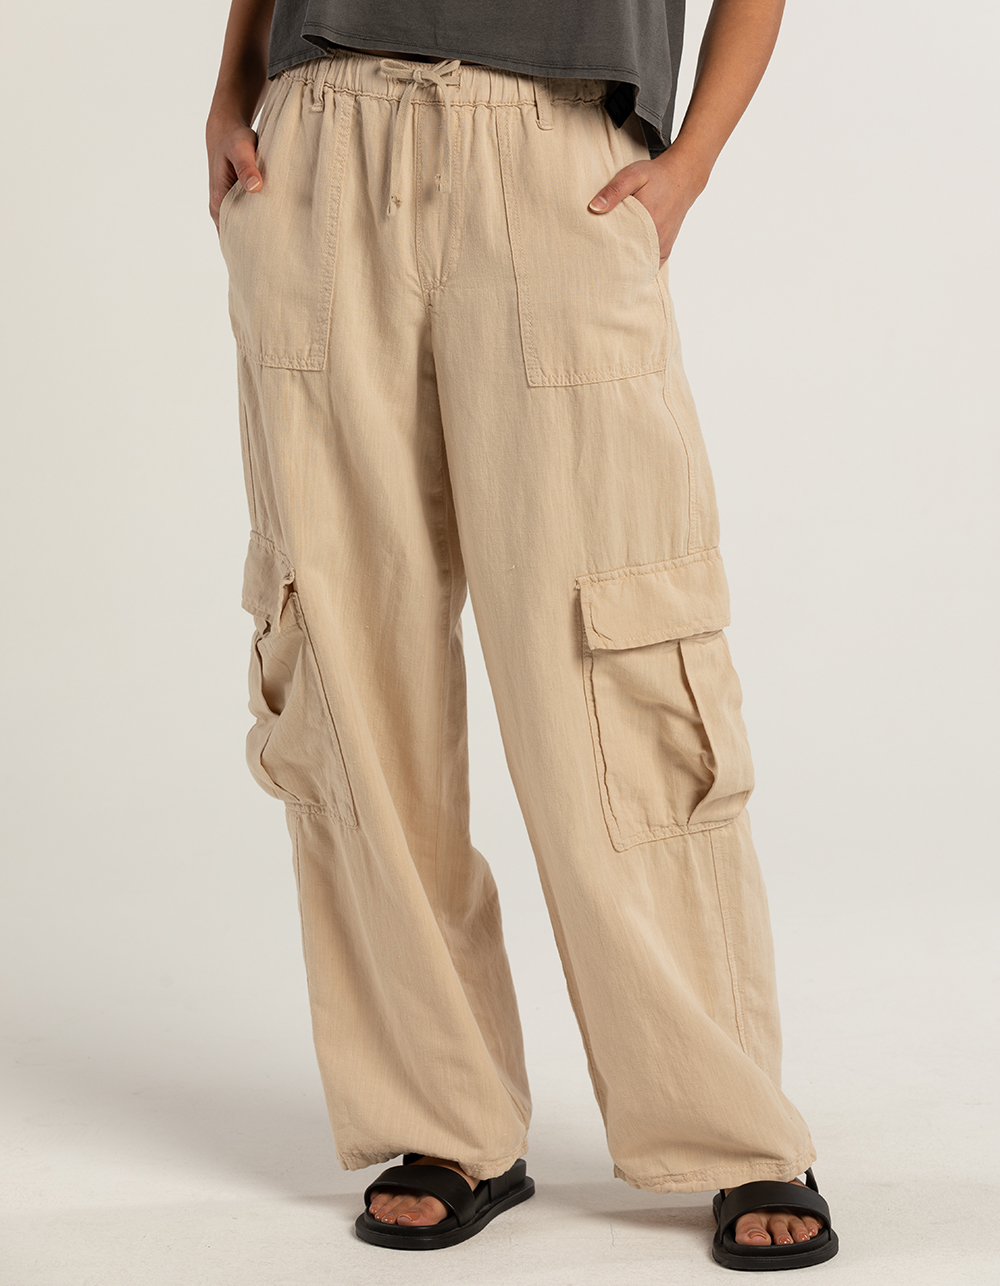 Bdg Urban Outfitters Linen Y2K Cargo Pants - Washed Black - Small